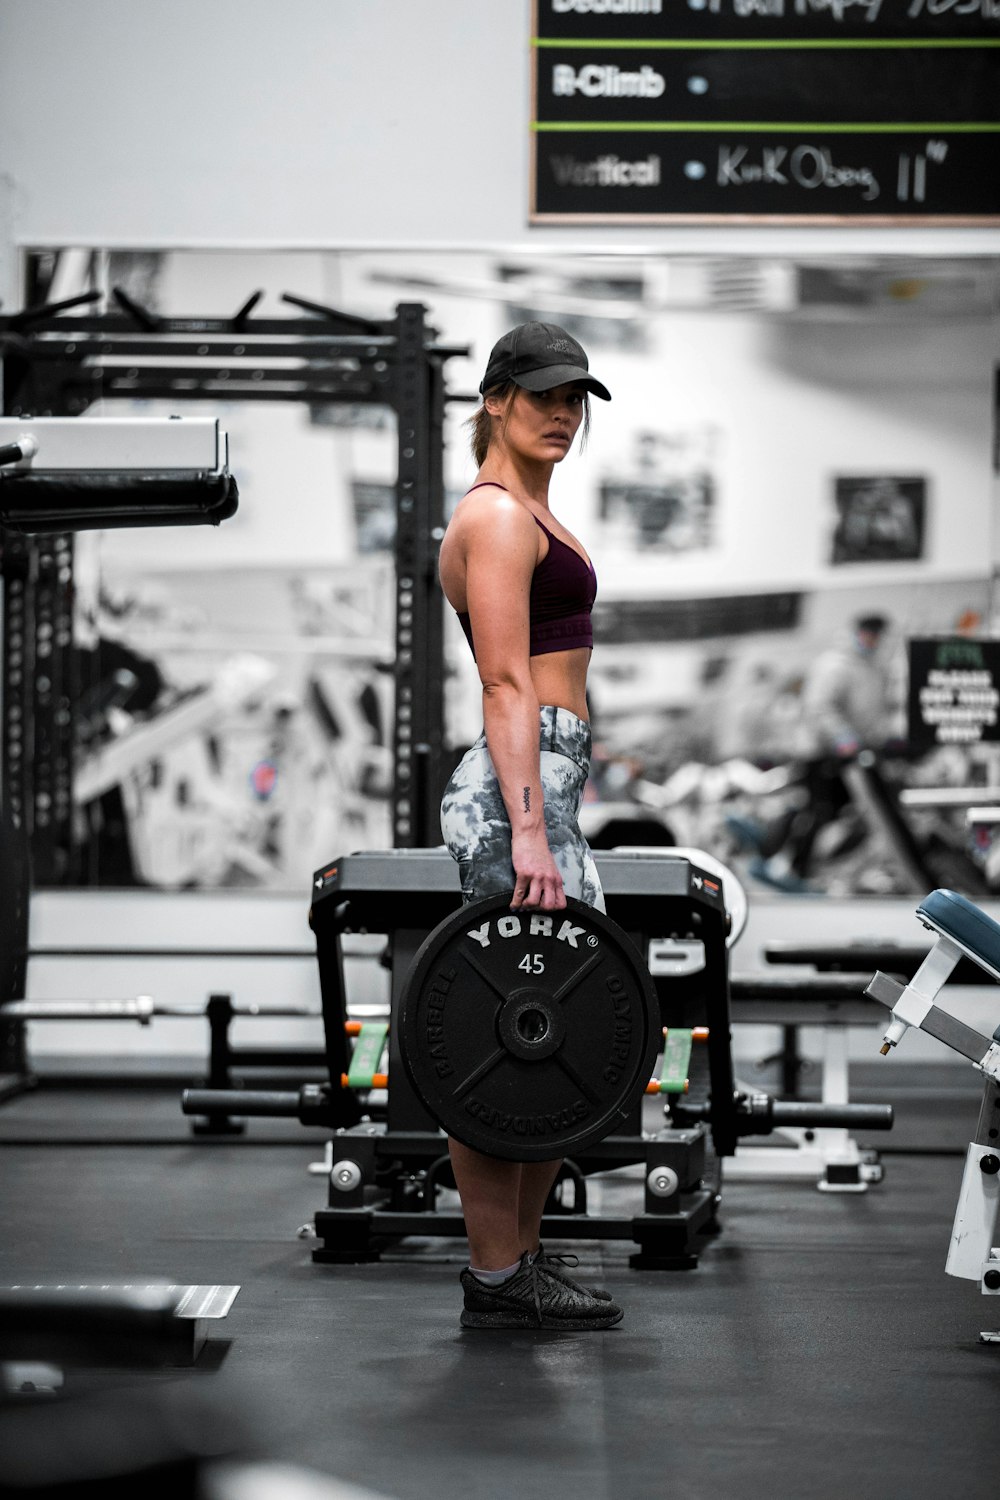 550+ Gym Girl Pictures | Download Free Images on Unsplash